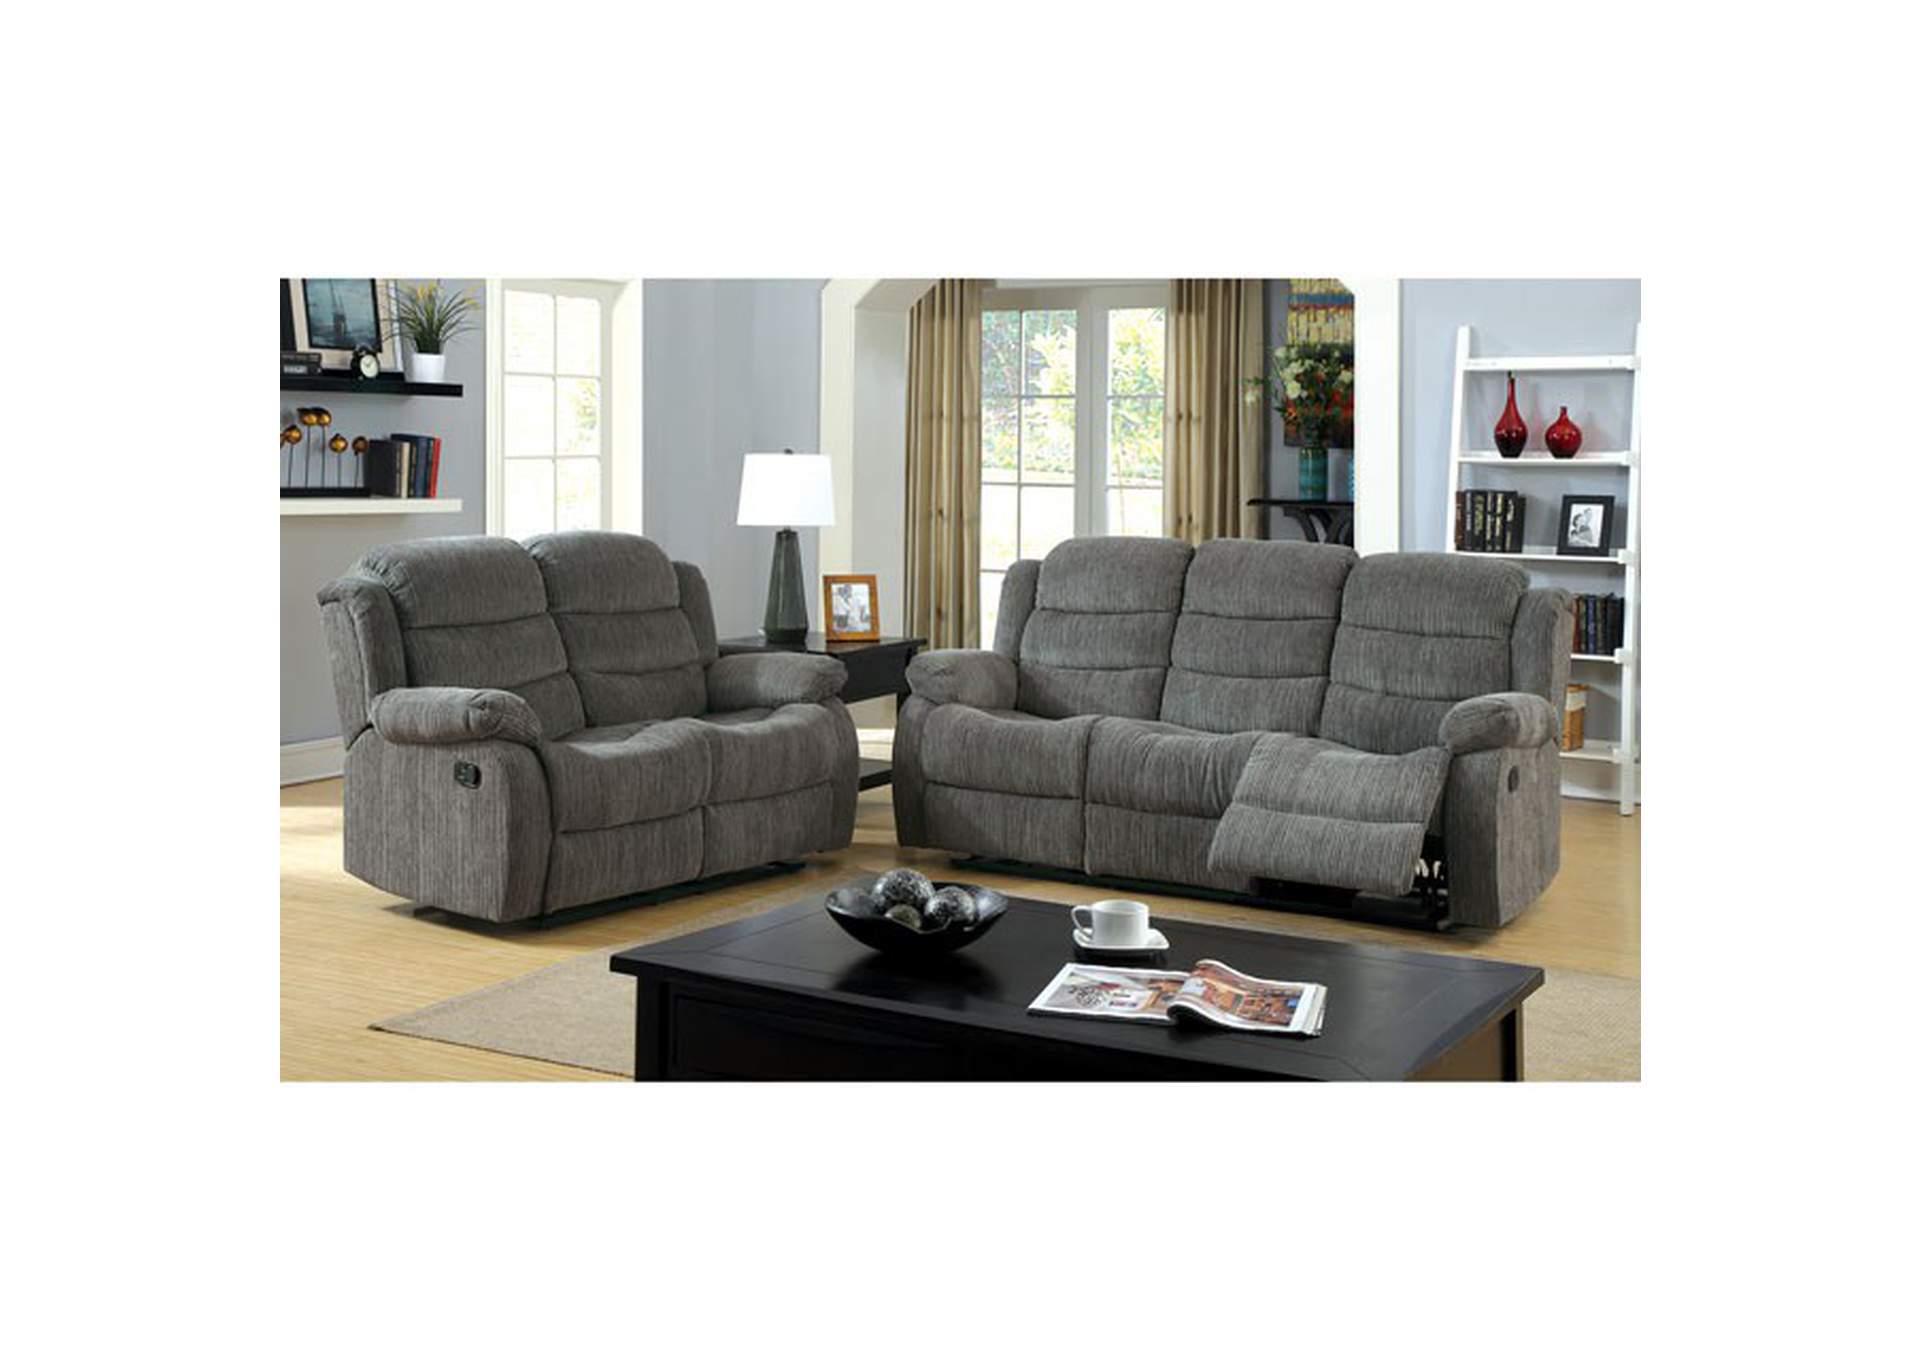 Millville Motion Love Seat,Furniture of America